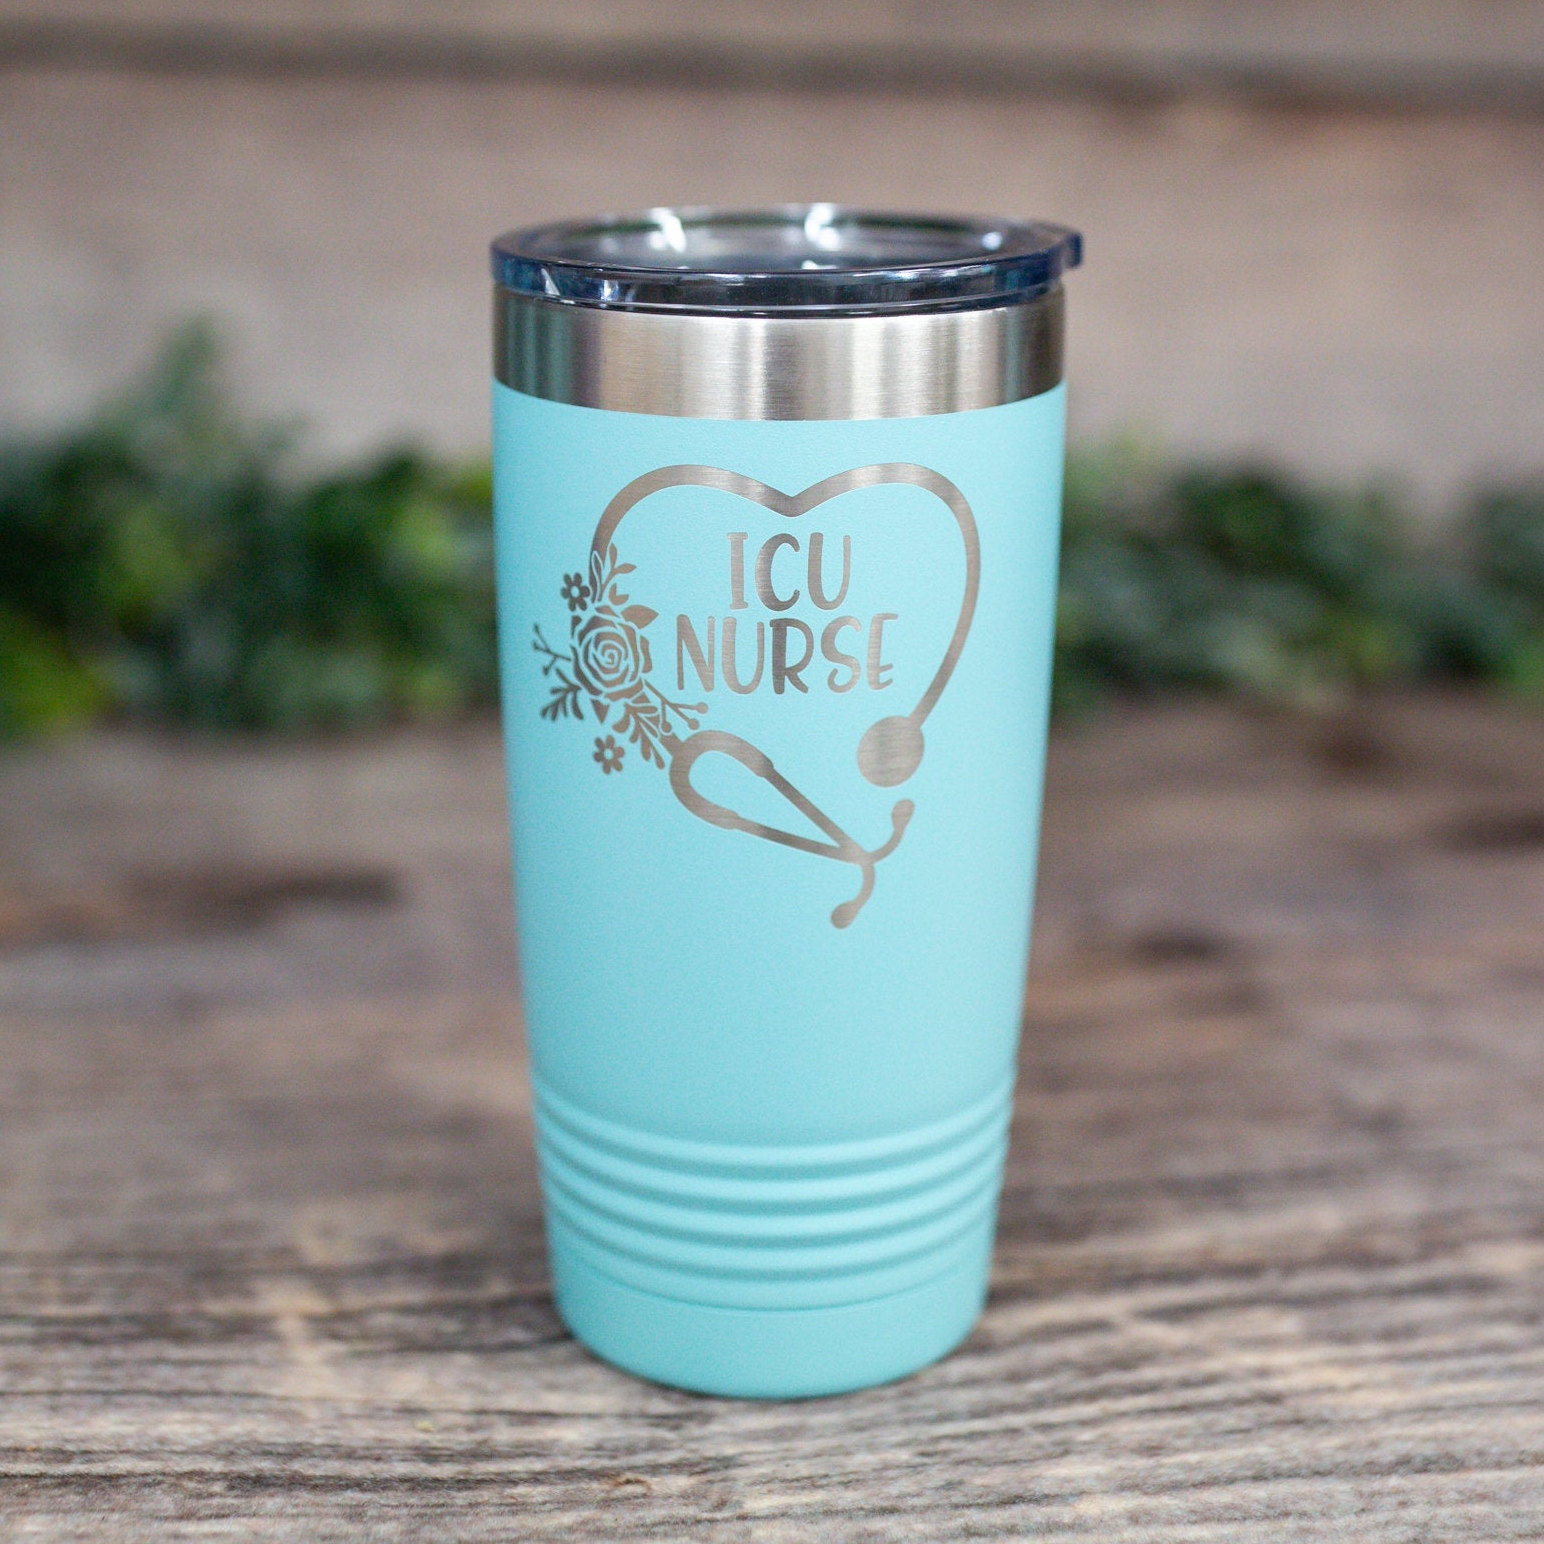 https://3cetching.com/wp-content/uploads/2021/07/icu-nurse-stethoscope-engraved-personalized-tumbler-with-name-nurse-gift-icu-gift-60f7245b.jpg